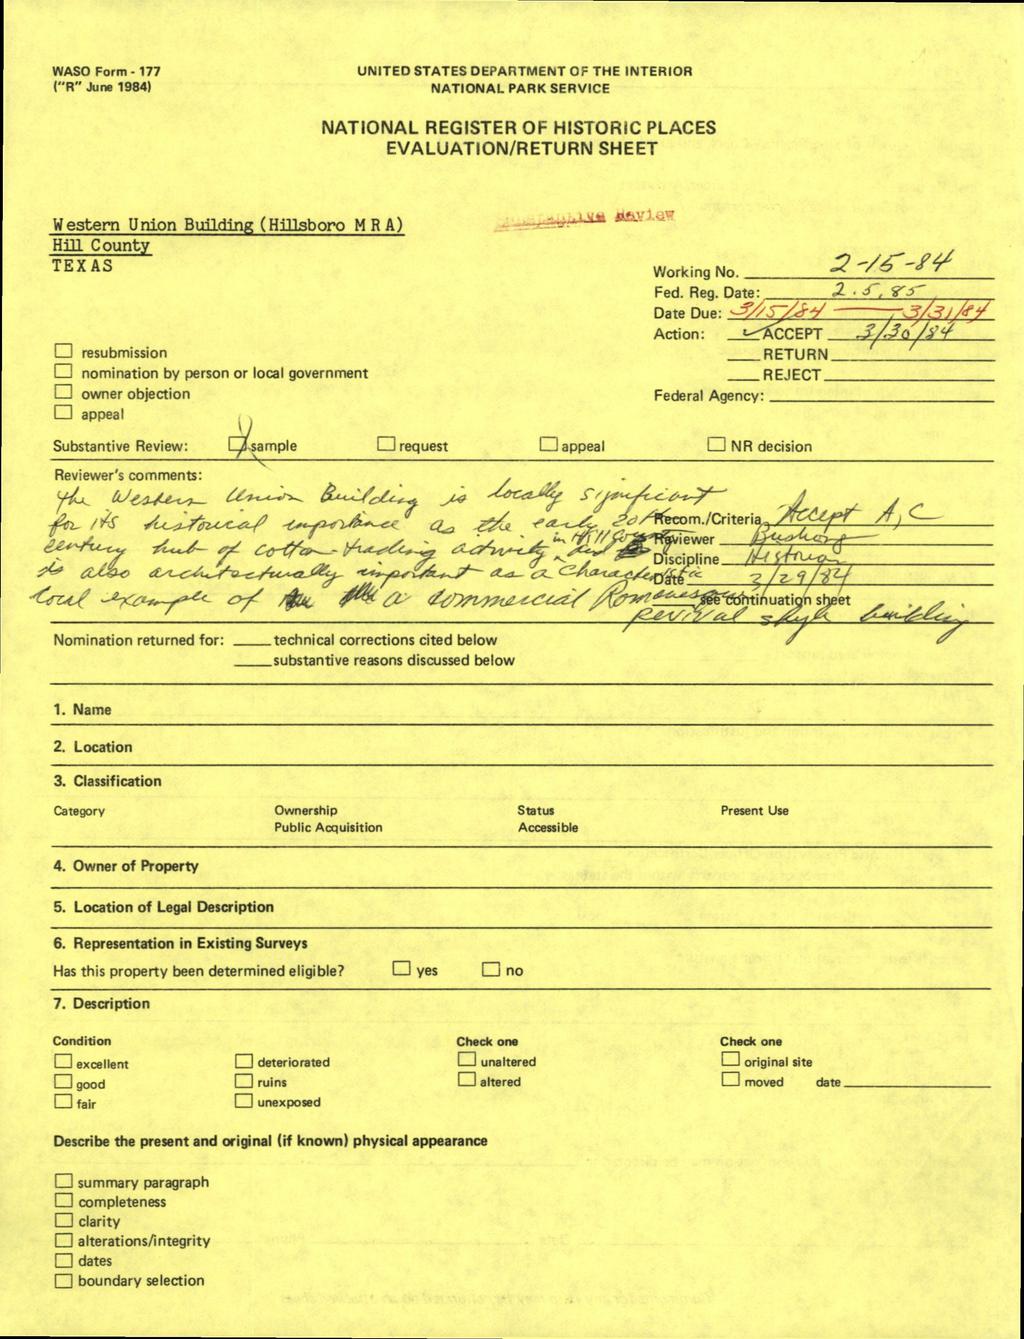 WASO Form - 177 ("R" June 1984) UNITED STATES DEPARTMENT OF THE INTERIOR NATIONAL PARK SERVICE NATIONAL REGISTER OF HISTORIC PLACES EVALUATION/RETURN SHEET Western Union BuHding (HiUsboro MRA) Hm